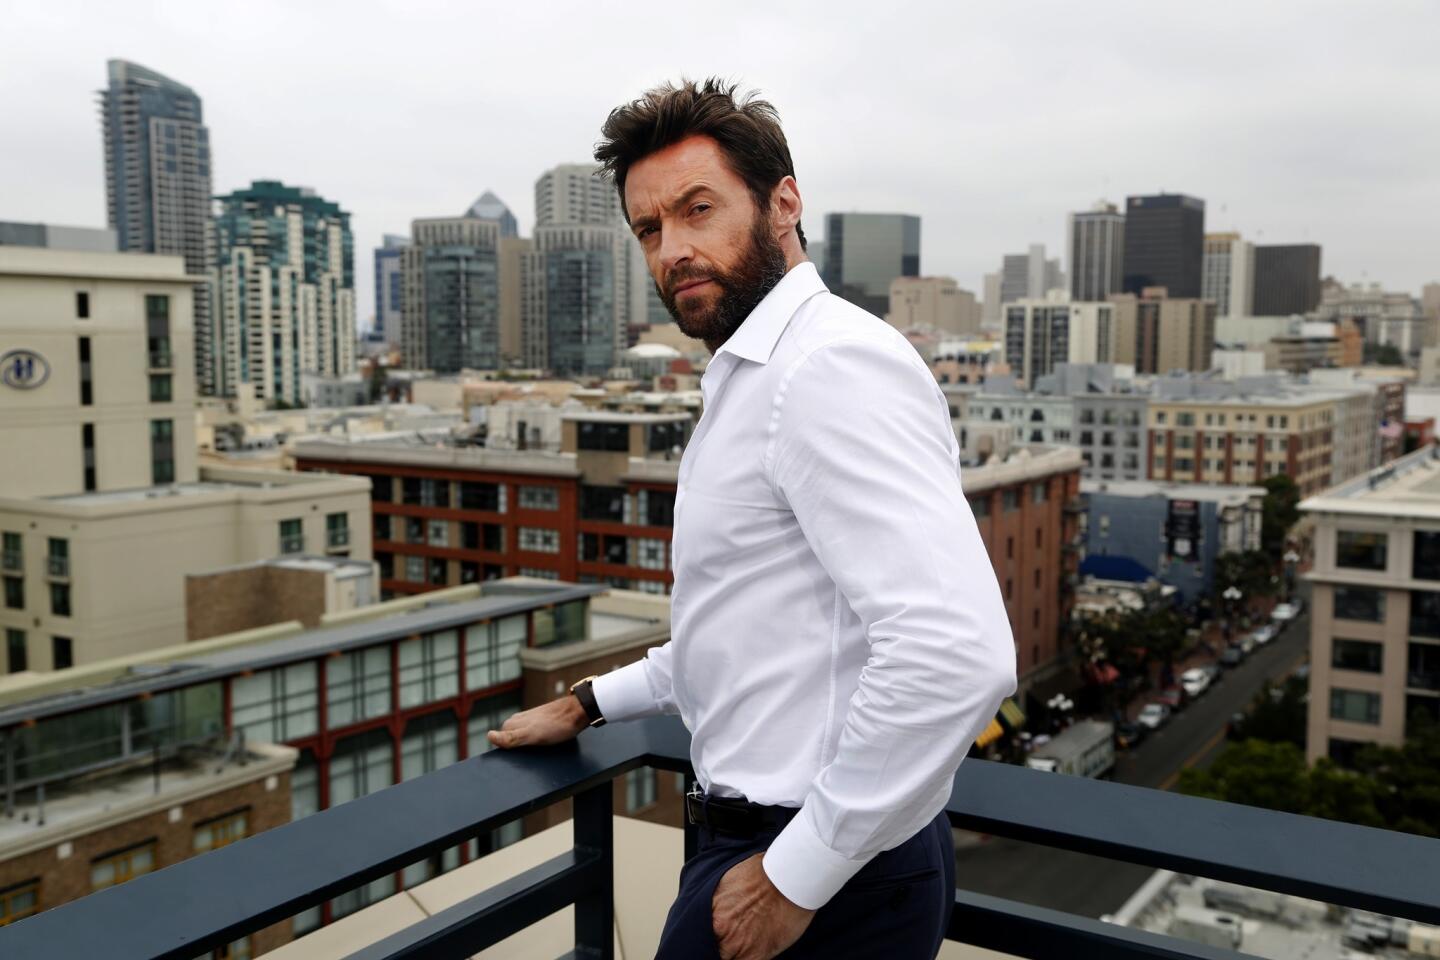 Aussie actor Hugh Jackman will host the Tonys this year, his fourth time as emcee. The "X-Men" star is no stranger to the stage, winning a Tony in 2004 for his work in "The Boy From Oz."